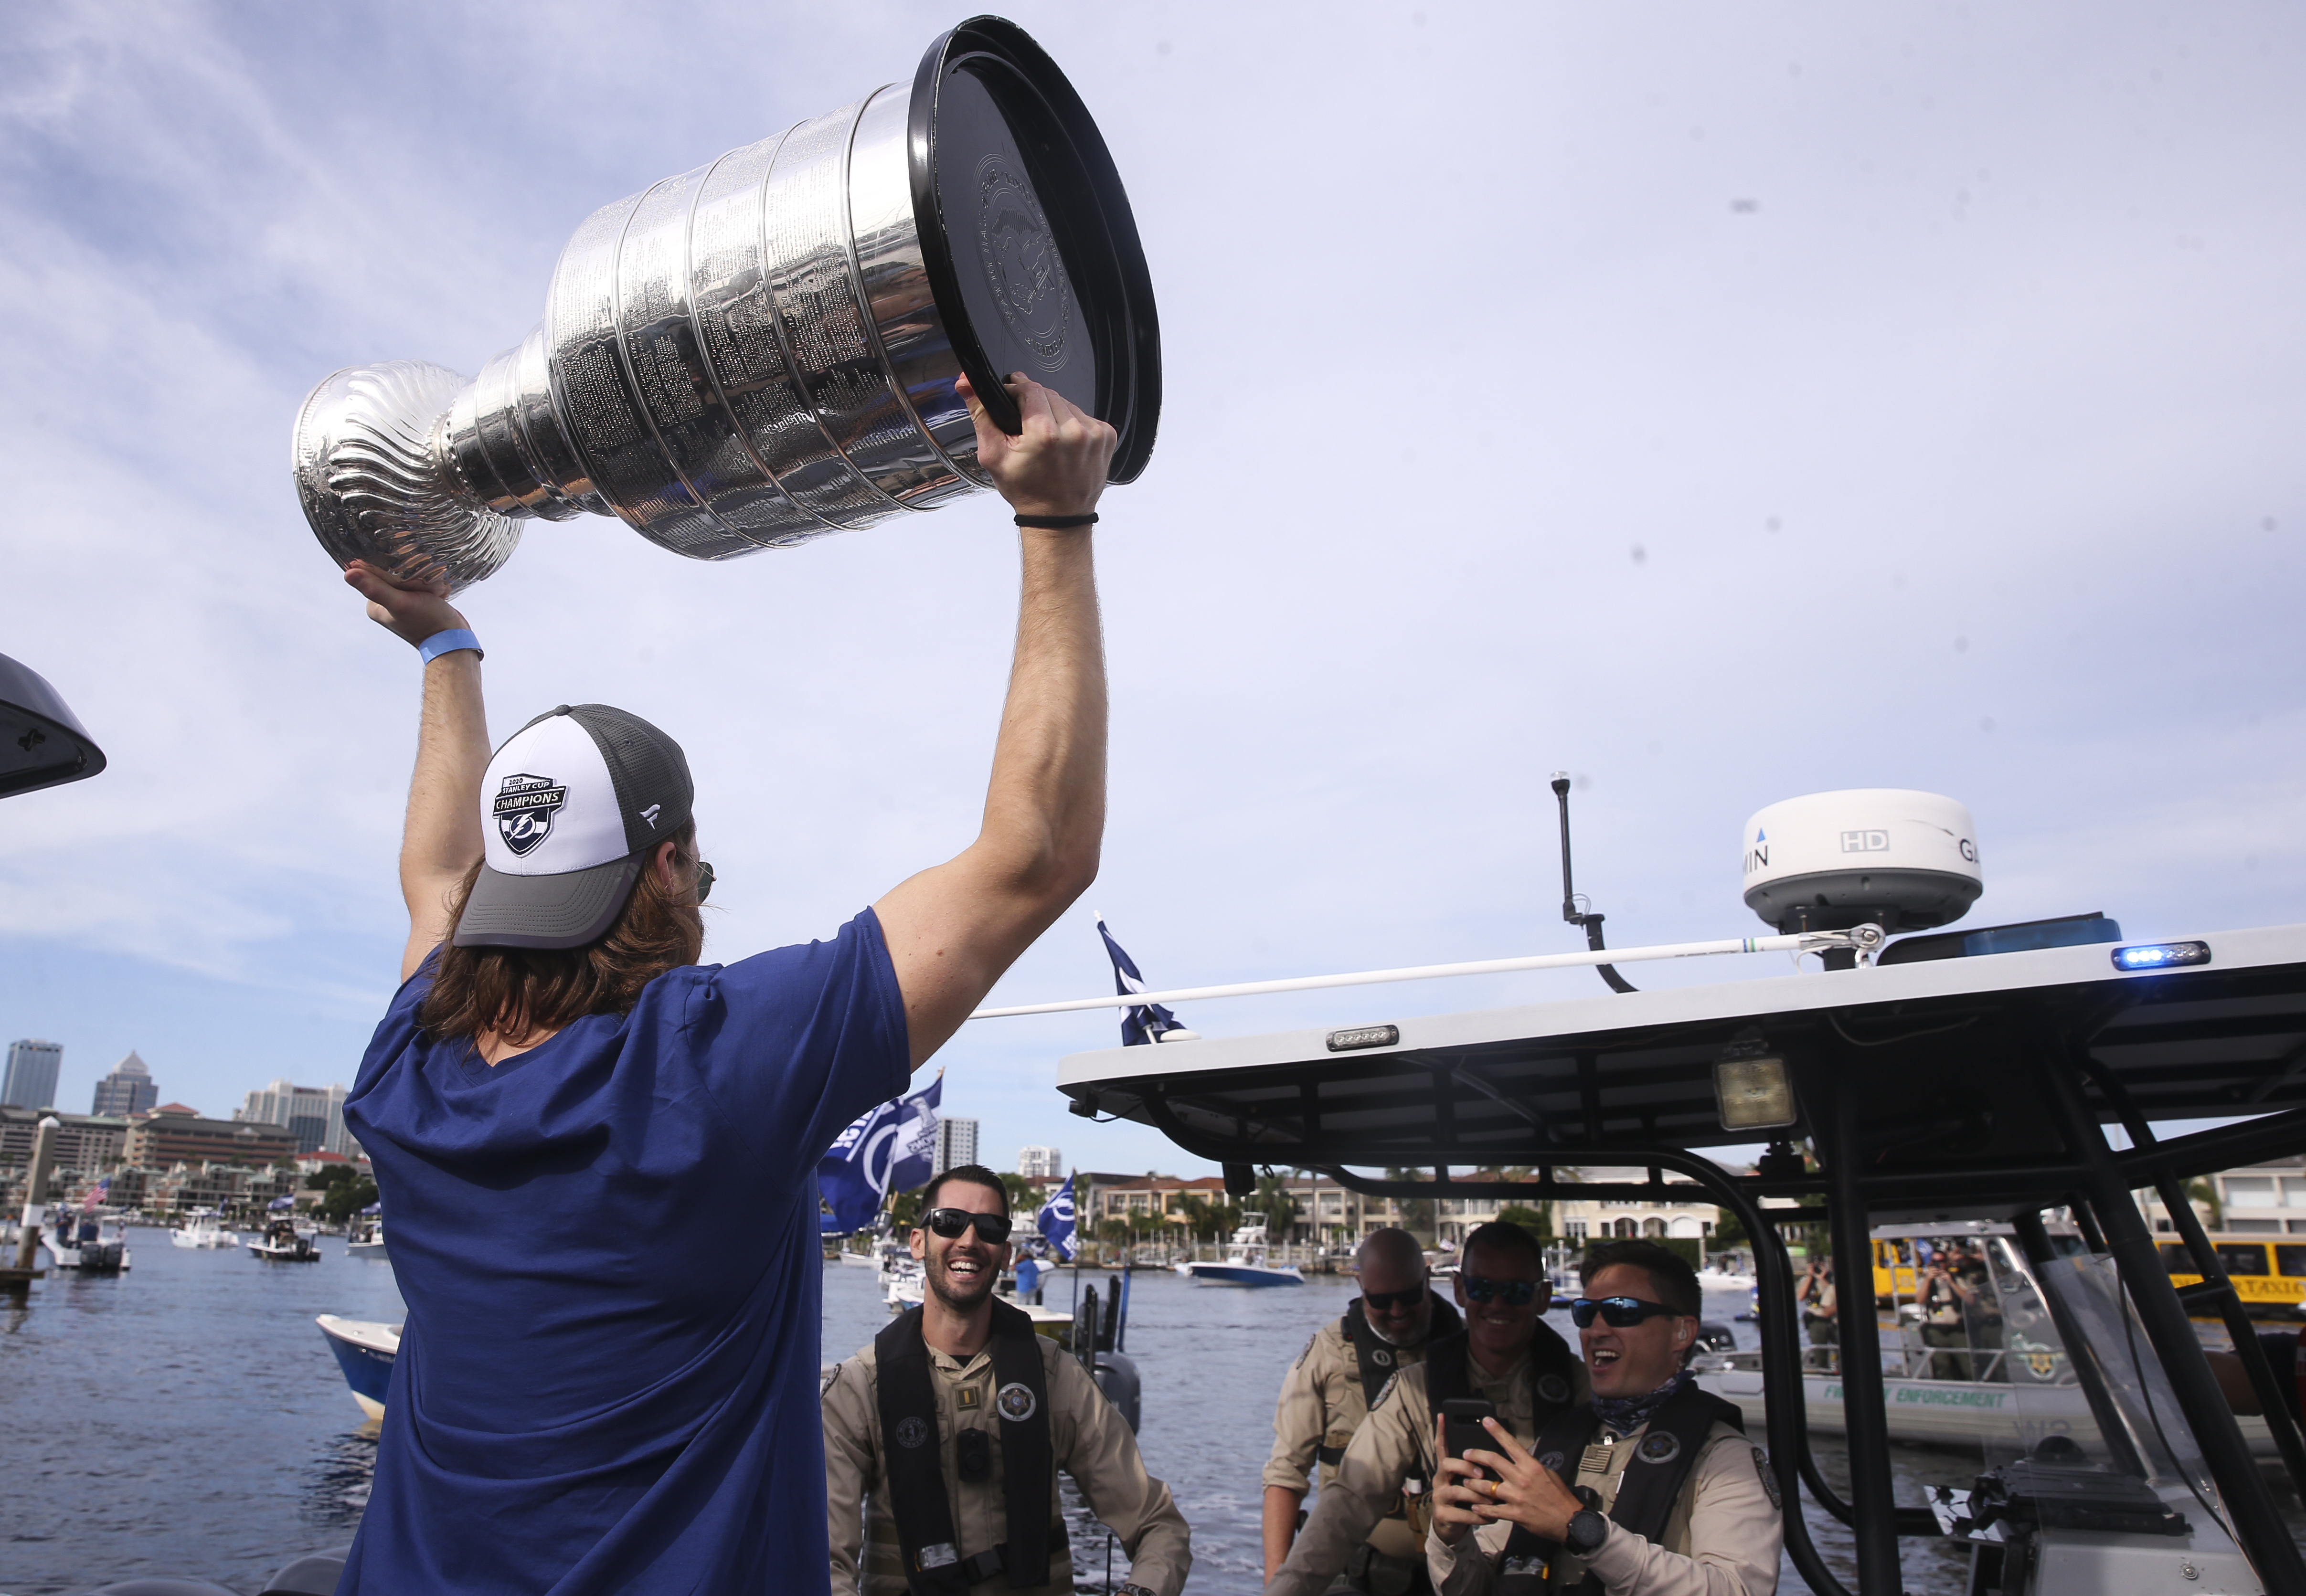 Three Facts To Know About the Stanley Cup Trophy – NBC 6 South Florida